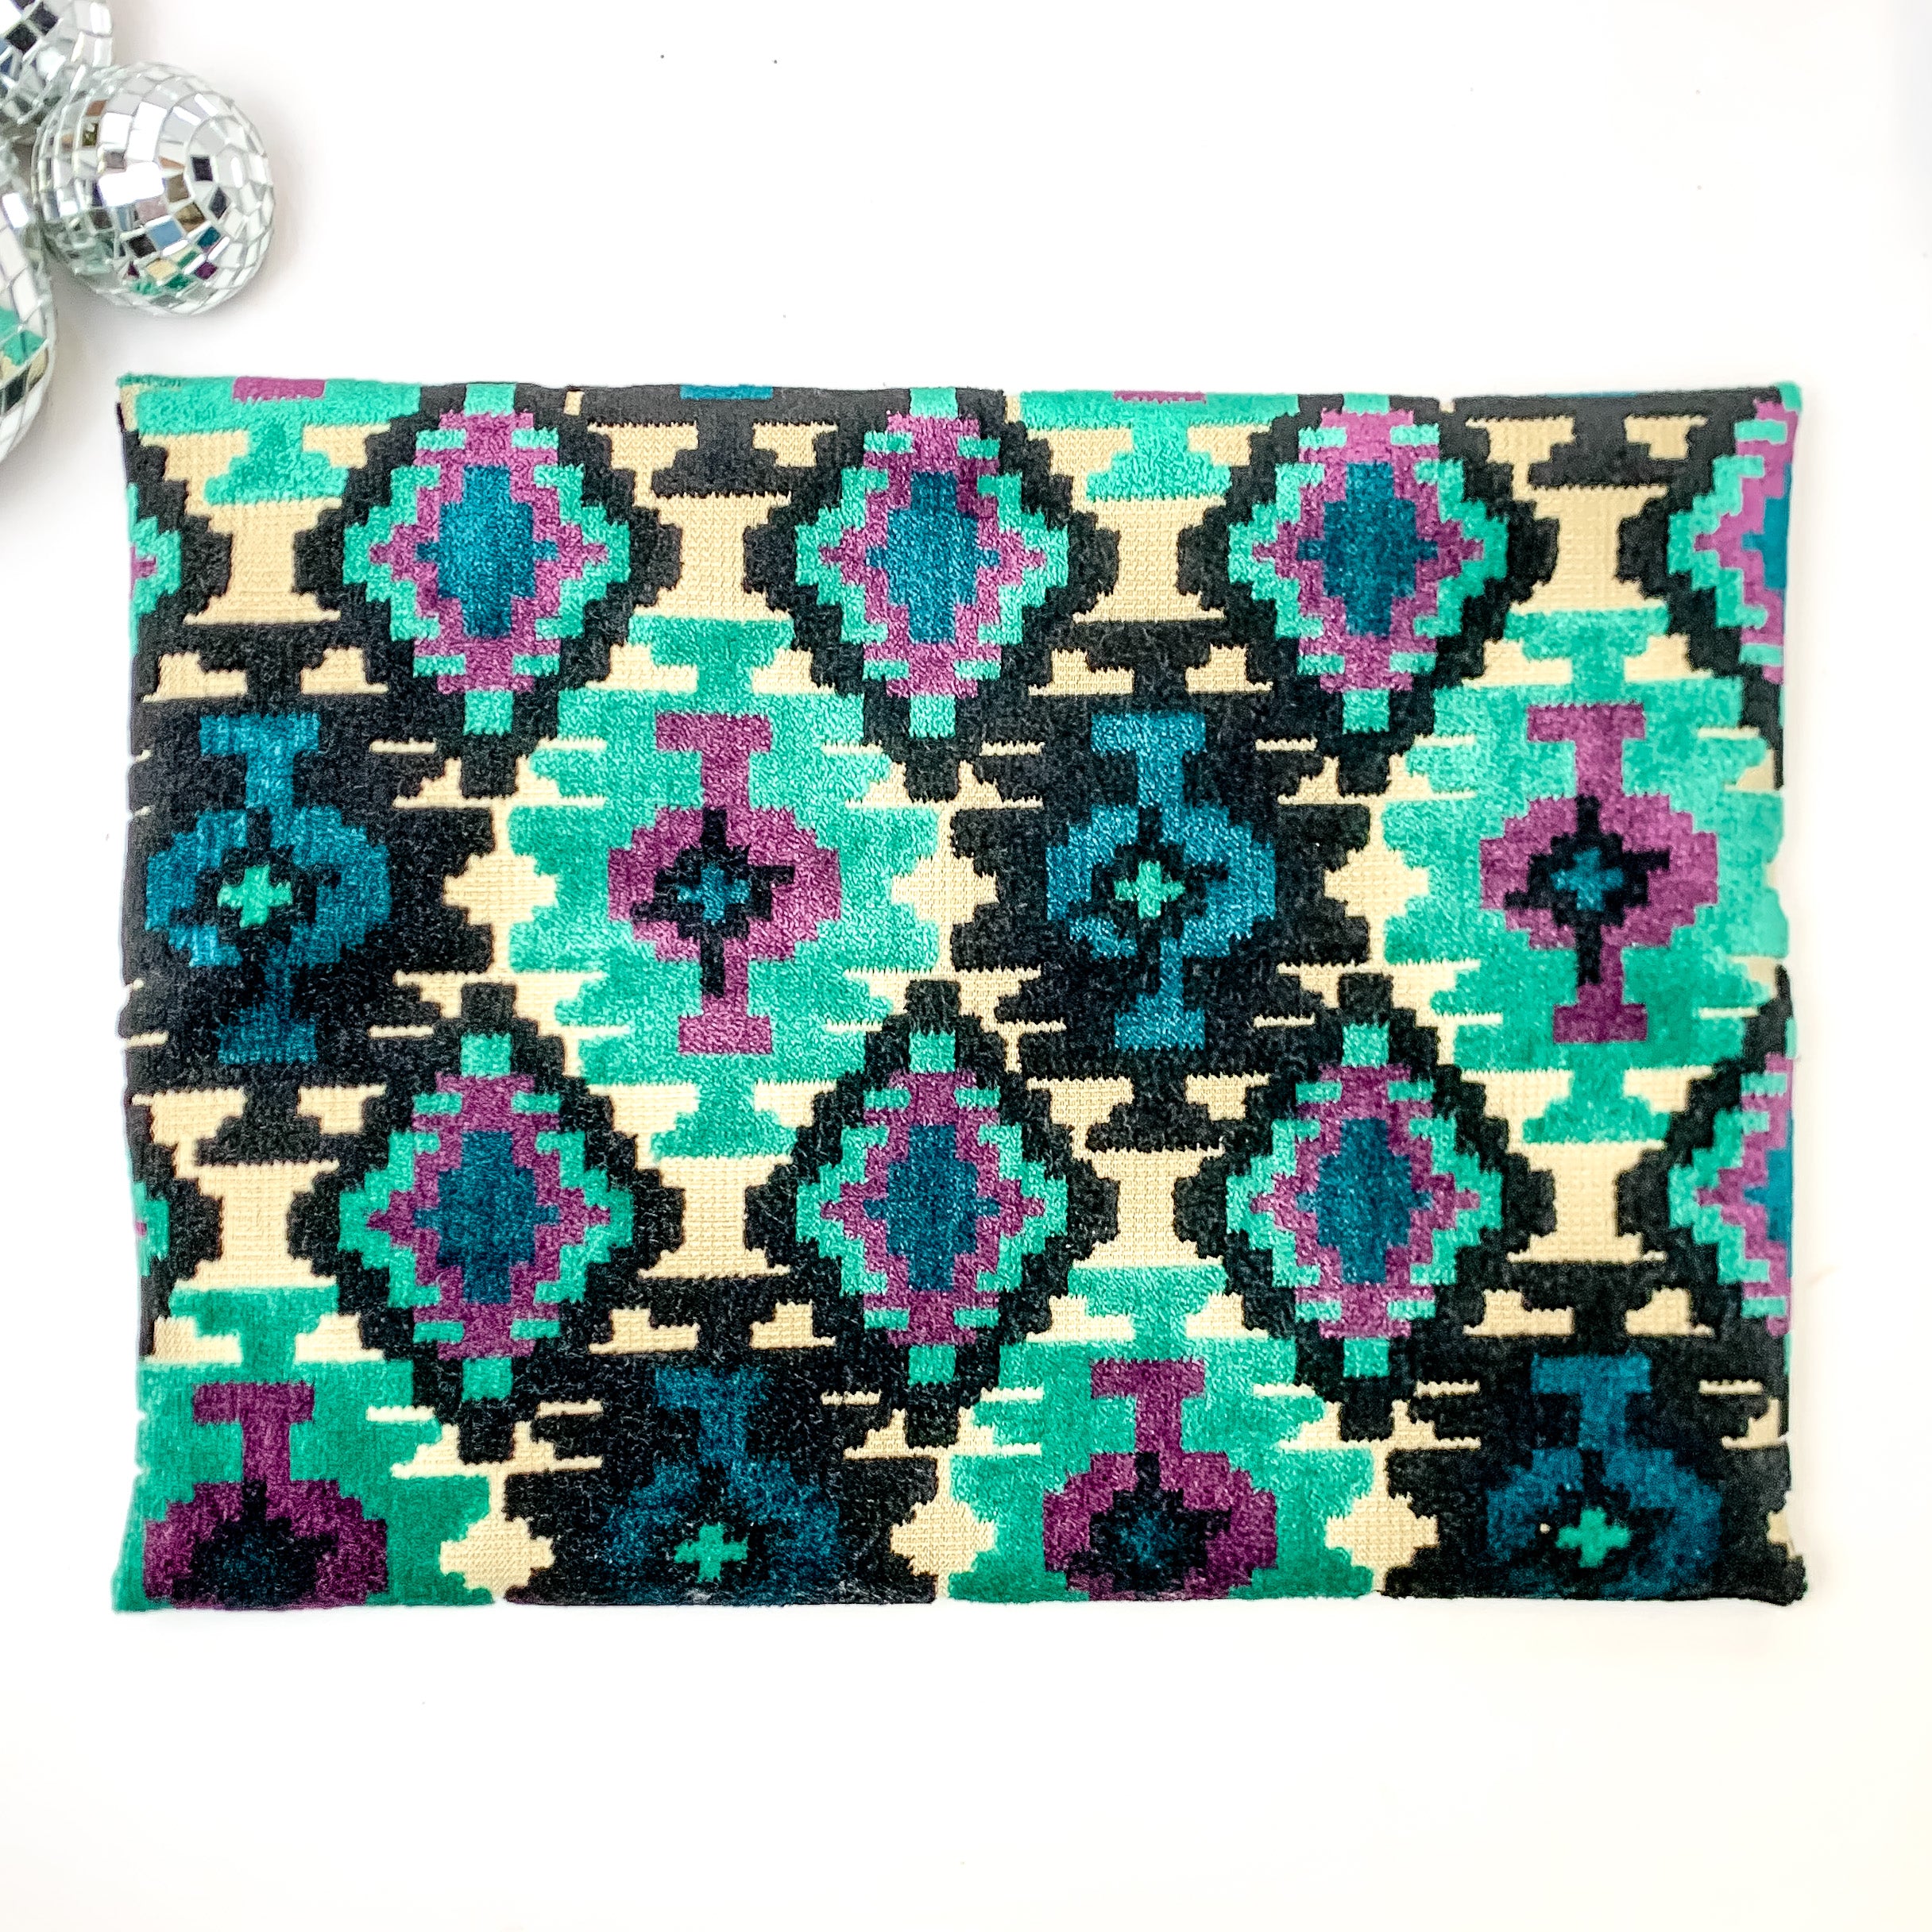 Makeup Junkie | Large Midnight Aztec Lay Flat Bag in Turquoise Green and Black Mix